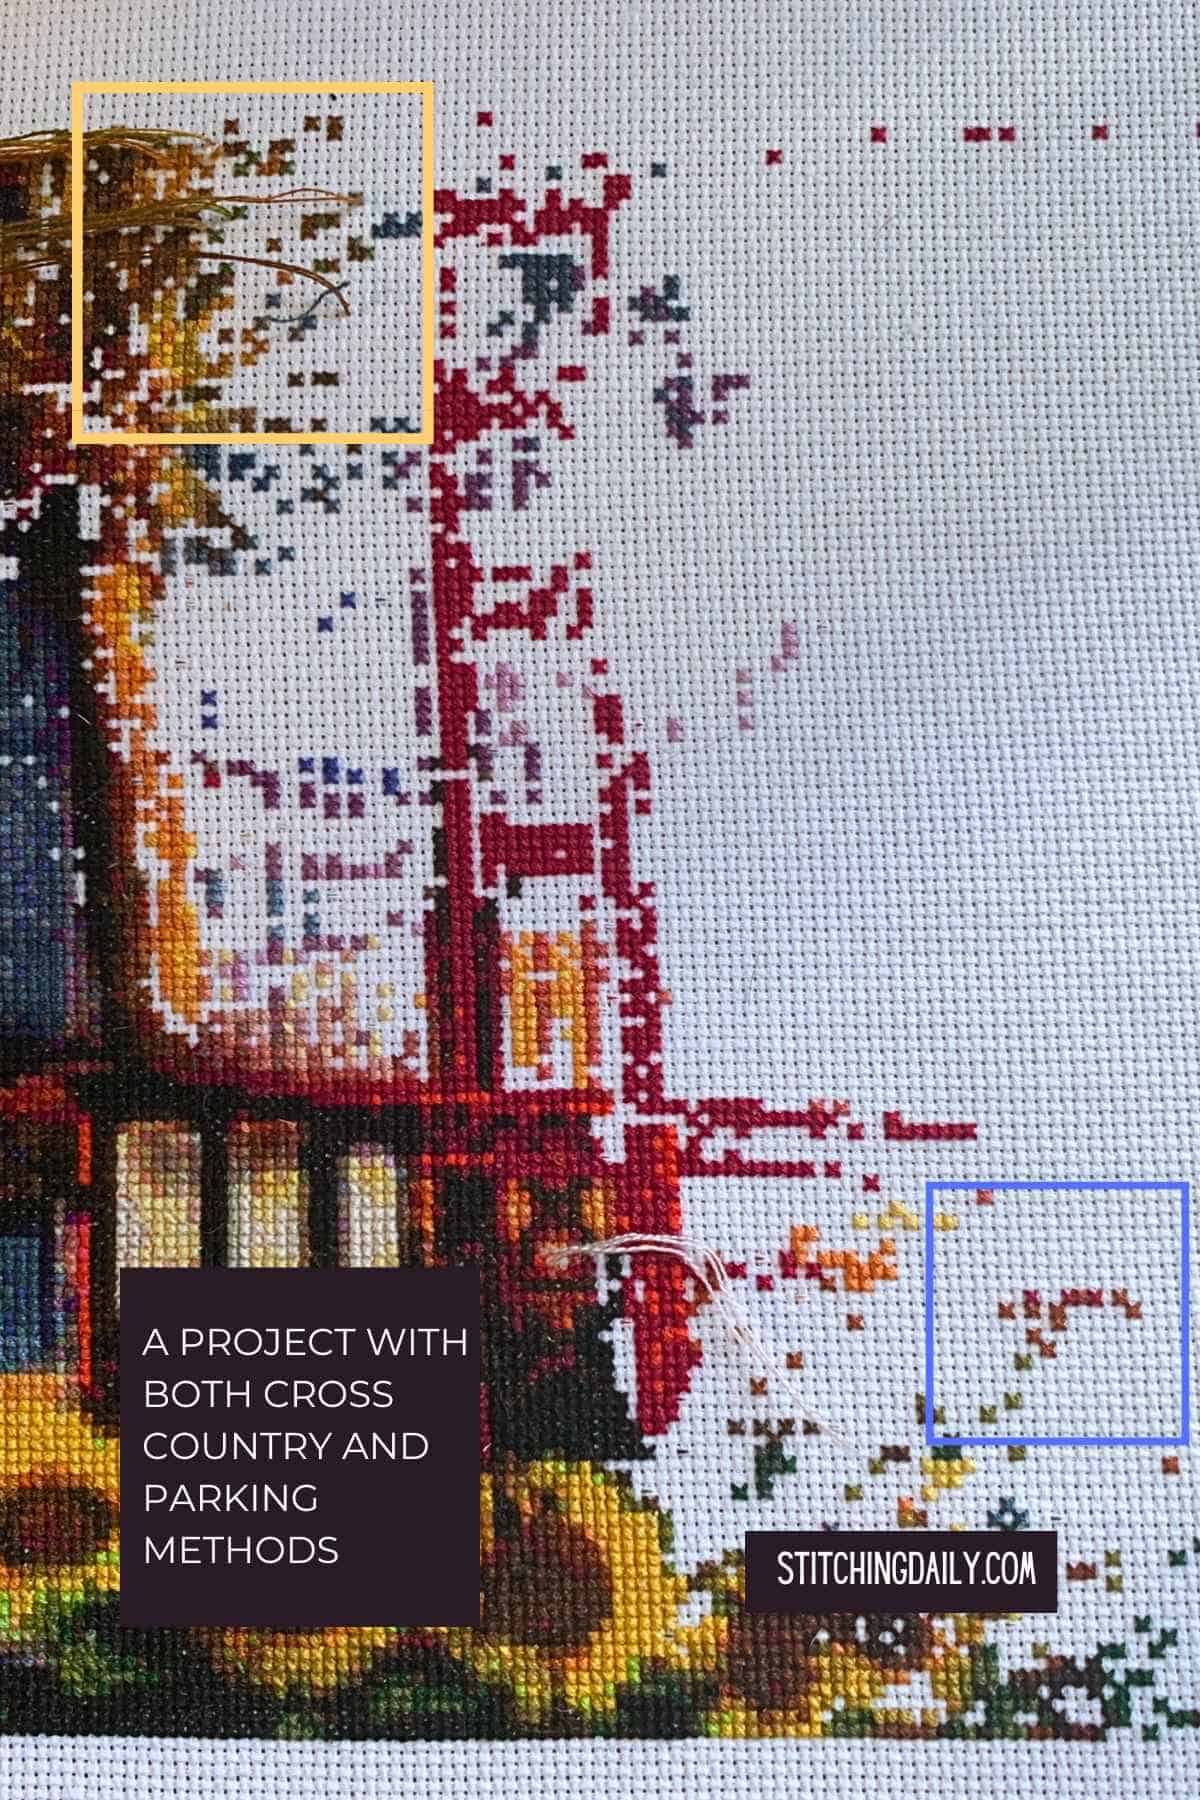 Close up of cross stitch project showing an example of parking and cross country.